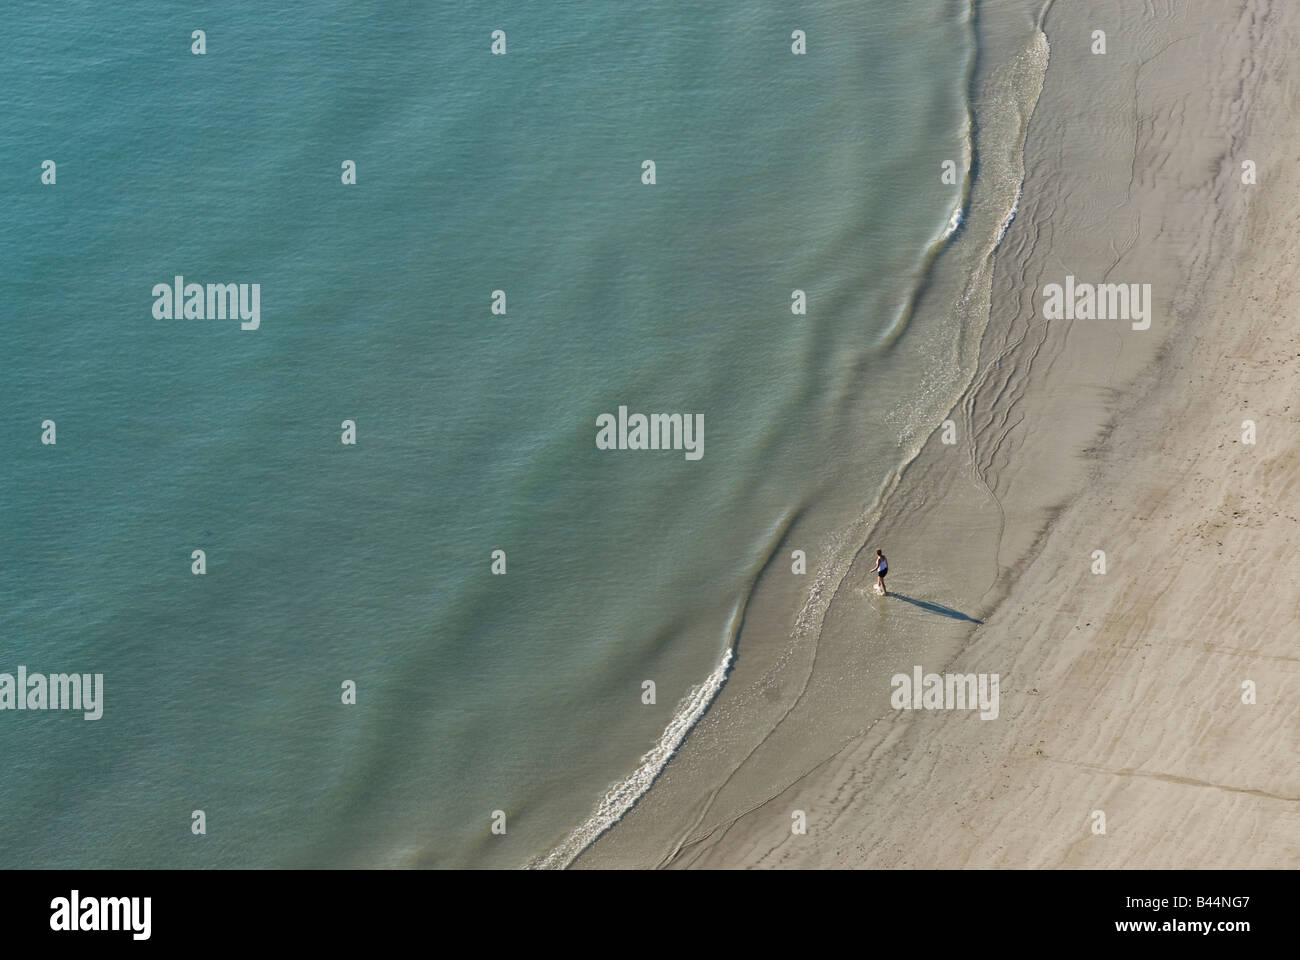 Aerial view of person stood alone at waters edge on sandy beach Stock Photo